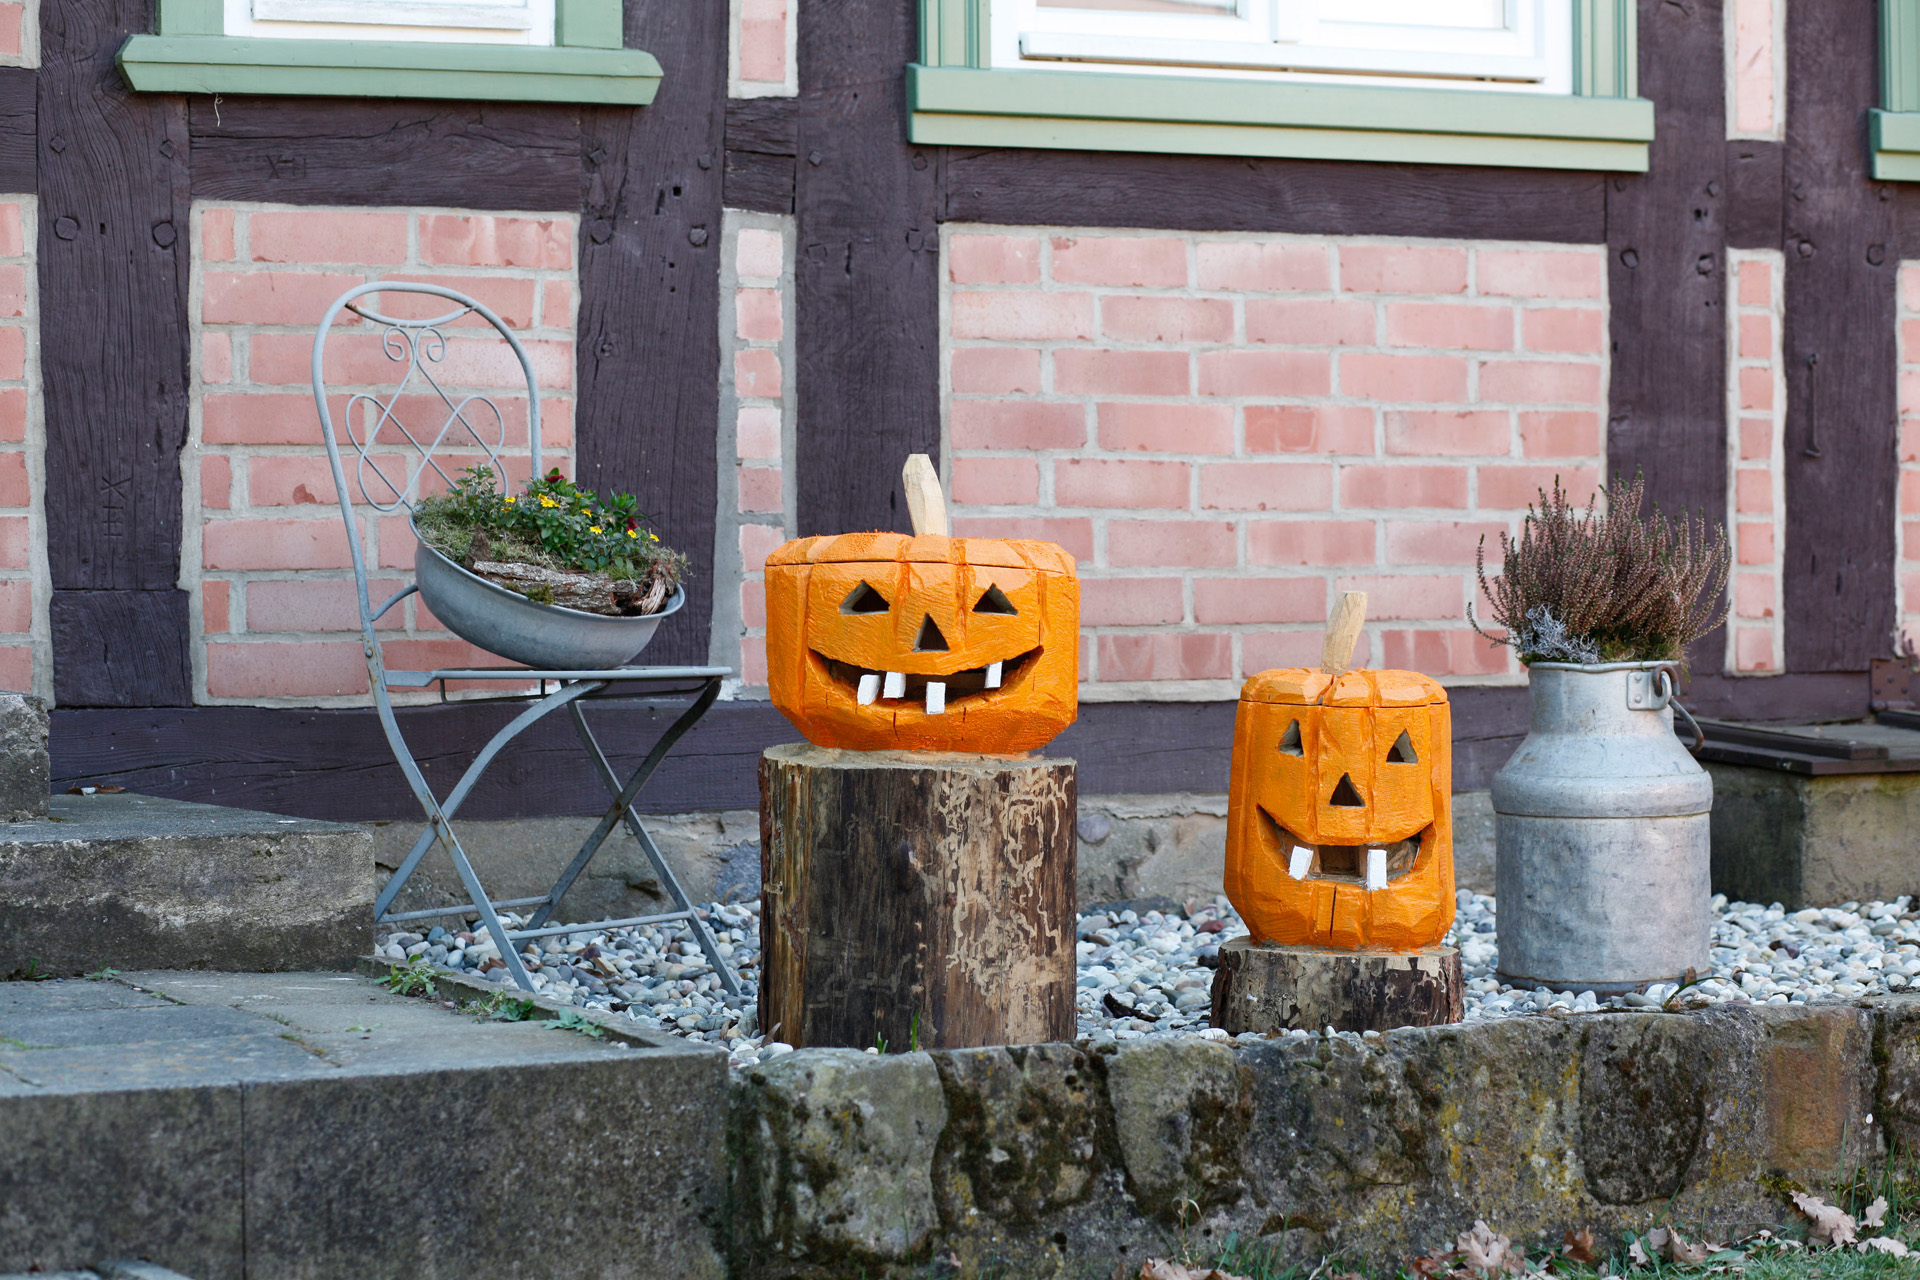 Painted DIY wooden pumpkin decorations made from logs outside a house